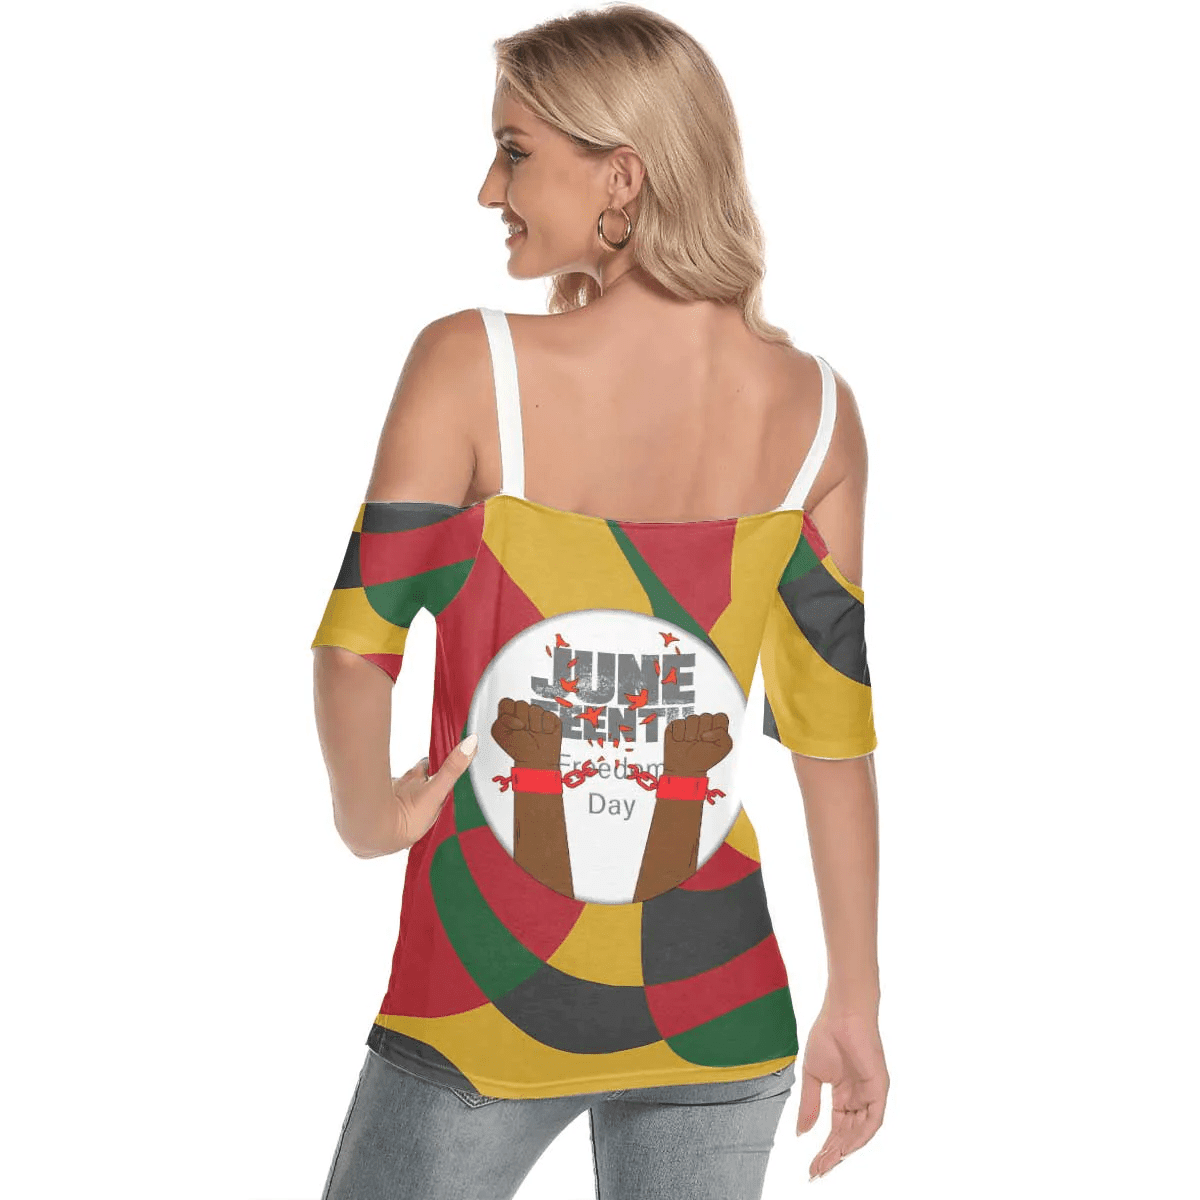 Africa Zone Clothing - Face Color Juneteenth Cold Shoulder T-shirt With Criss Cross Strips A95